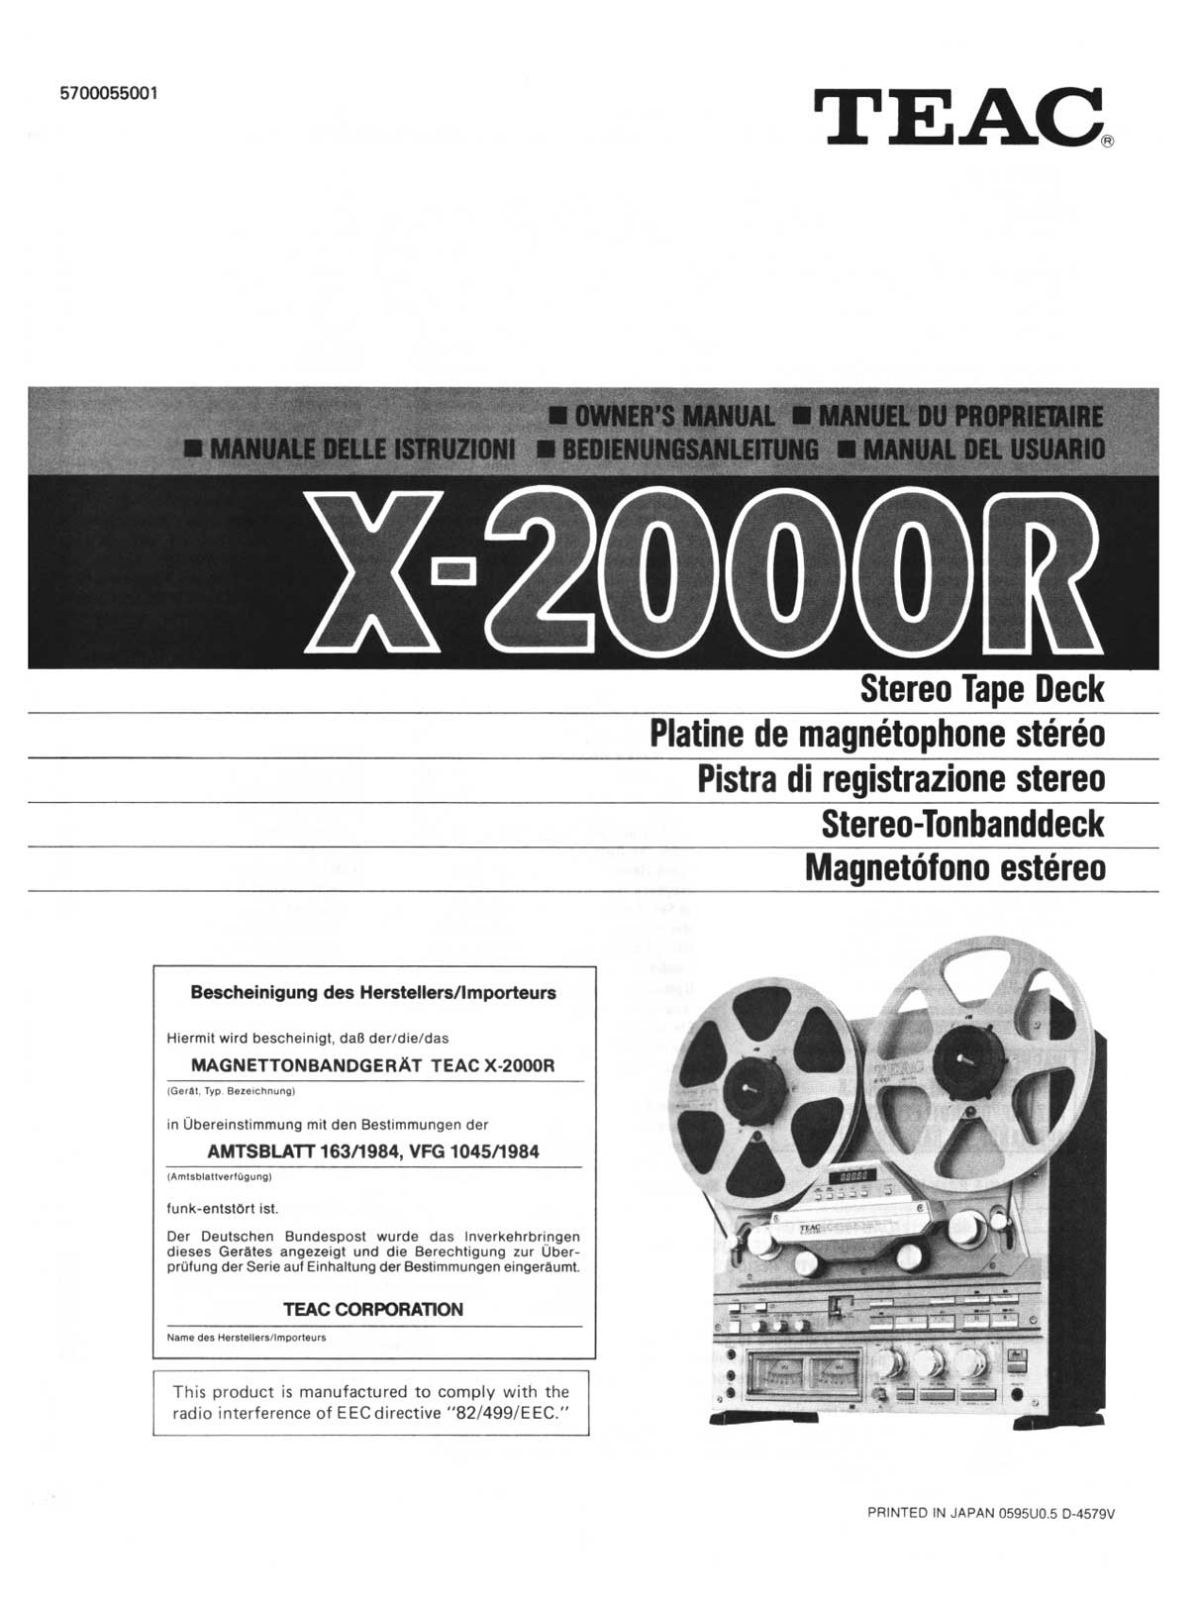 TEAC X-2000-R Owners manual